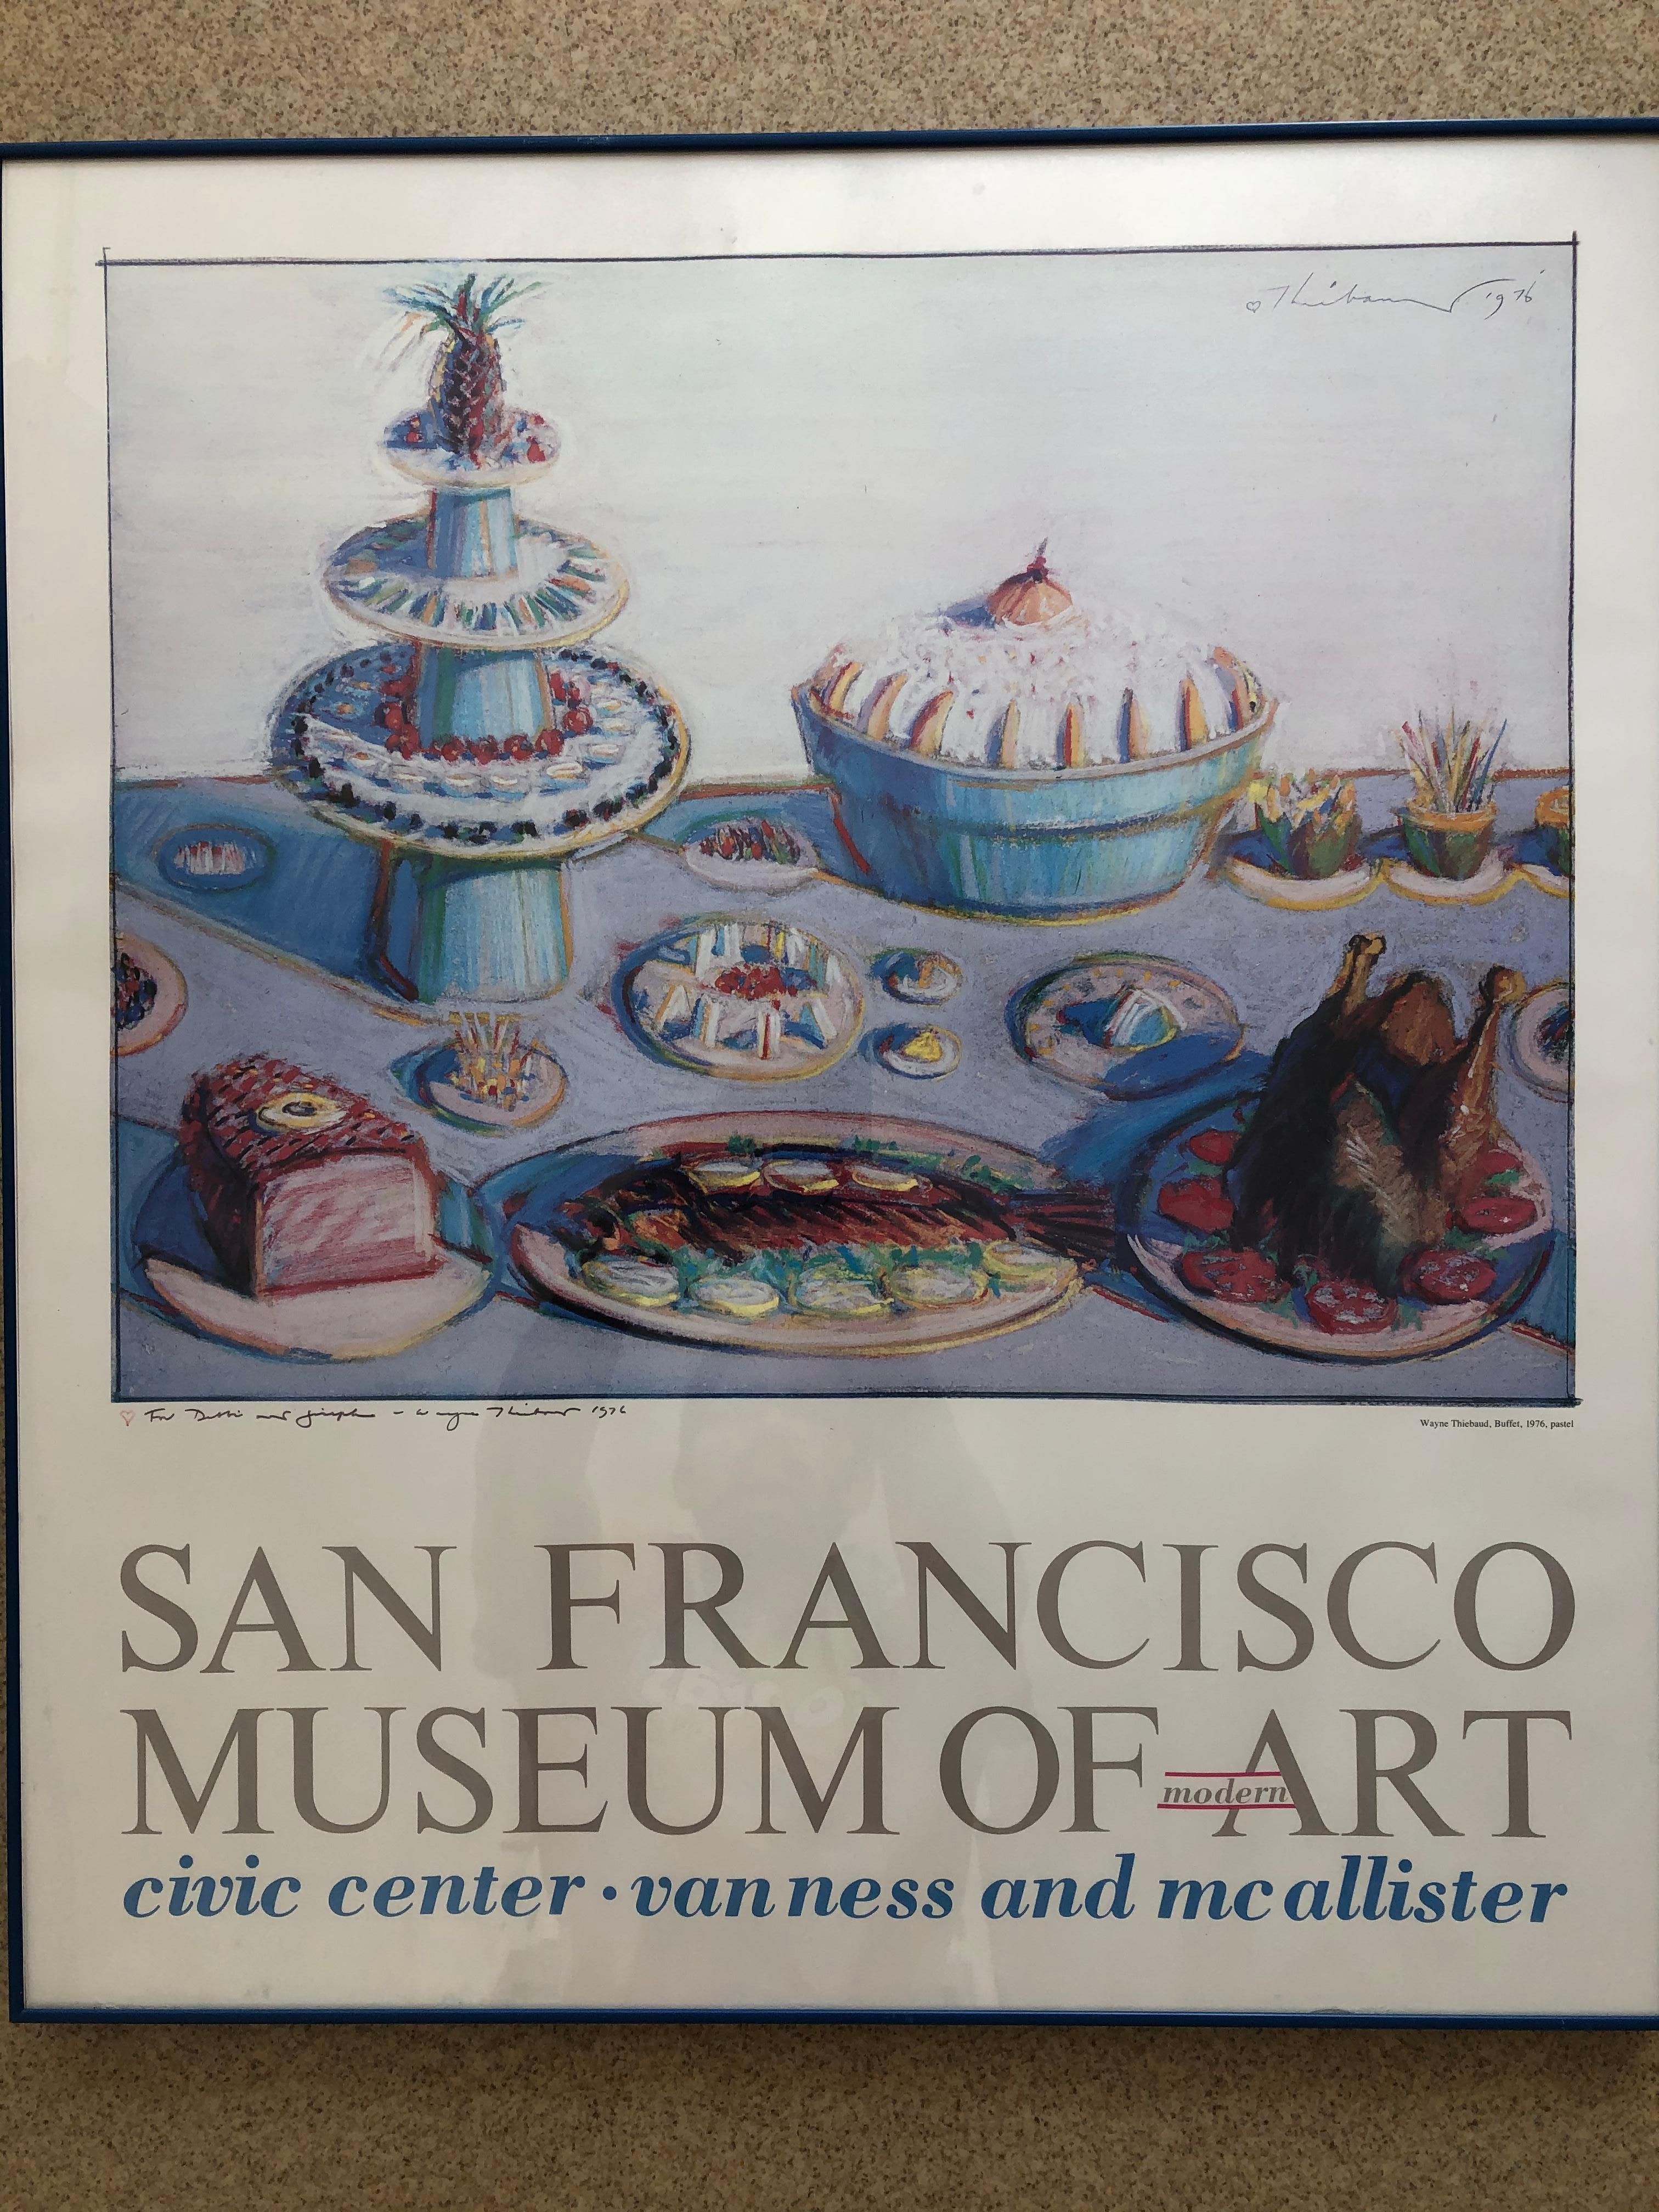 Wayne Thiebaud 1976 Signed San Francisco Museum of Modern Art Poster For Sale 1